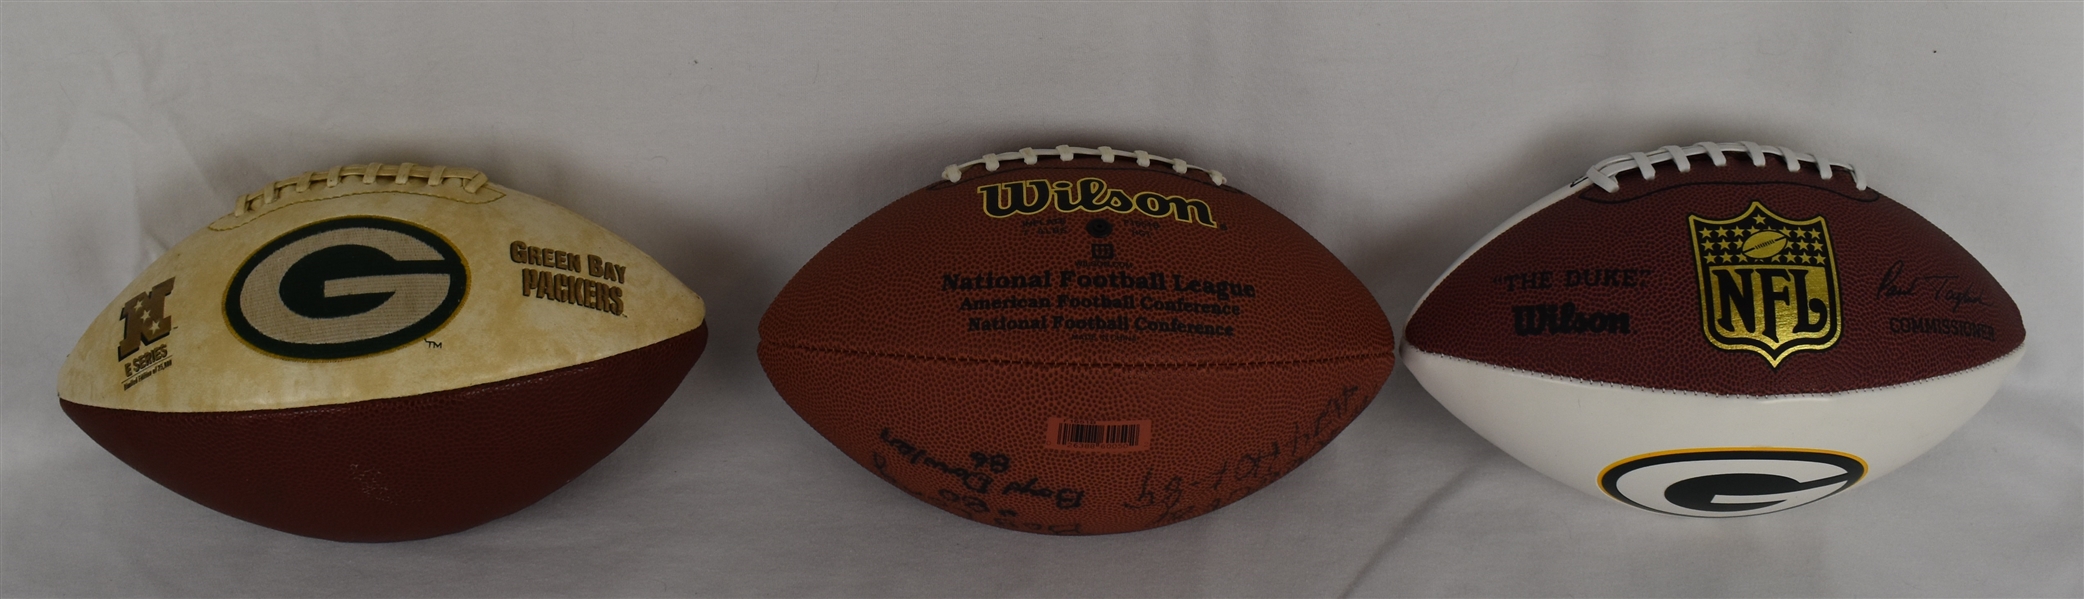 Green Bay Packers Autographed Footballs